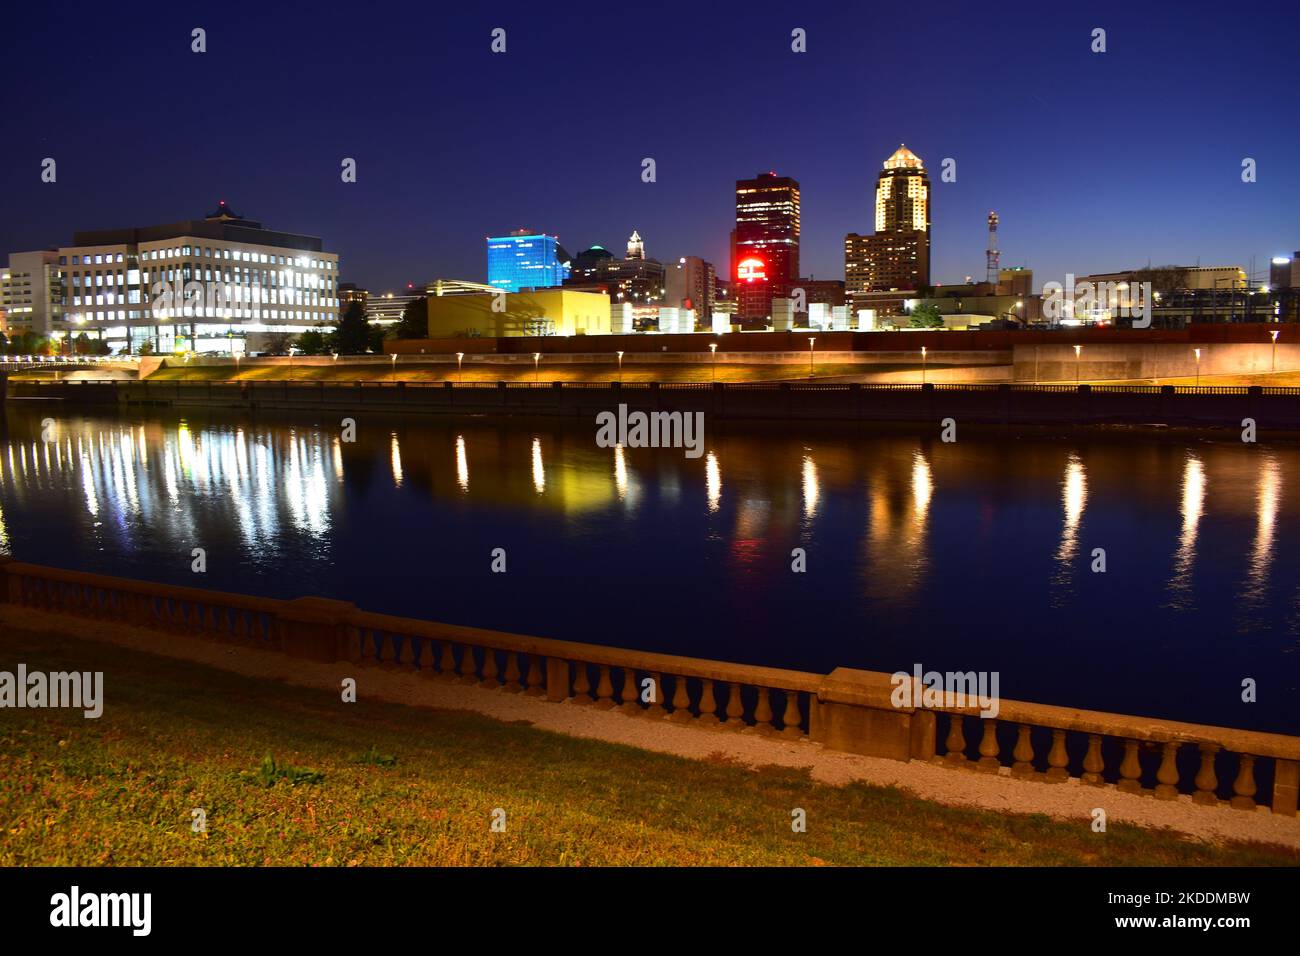 West des moines hi-res stock photography and images - Alamy